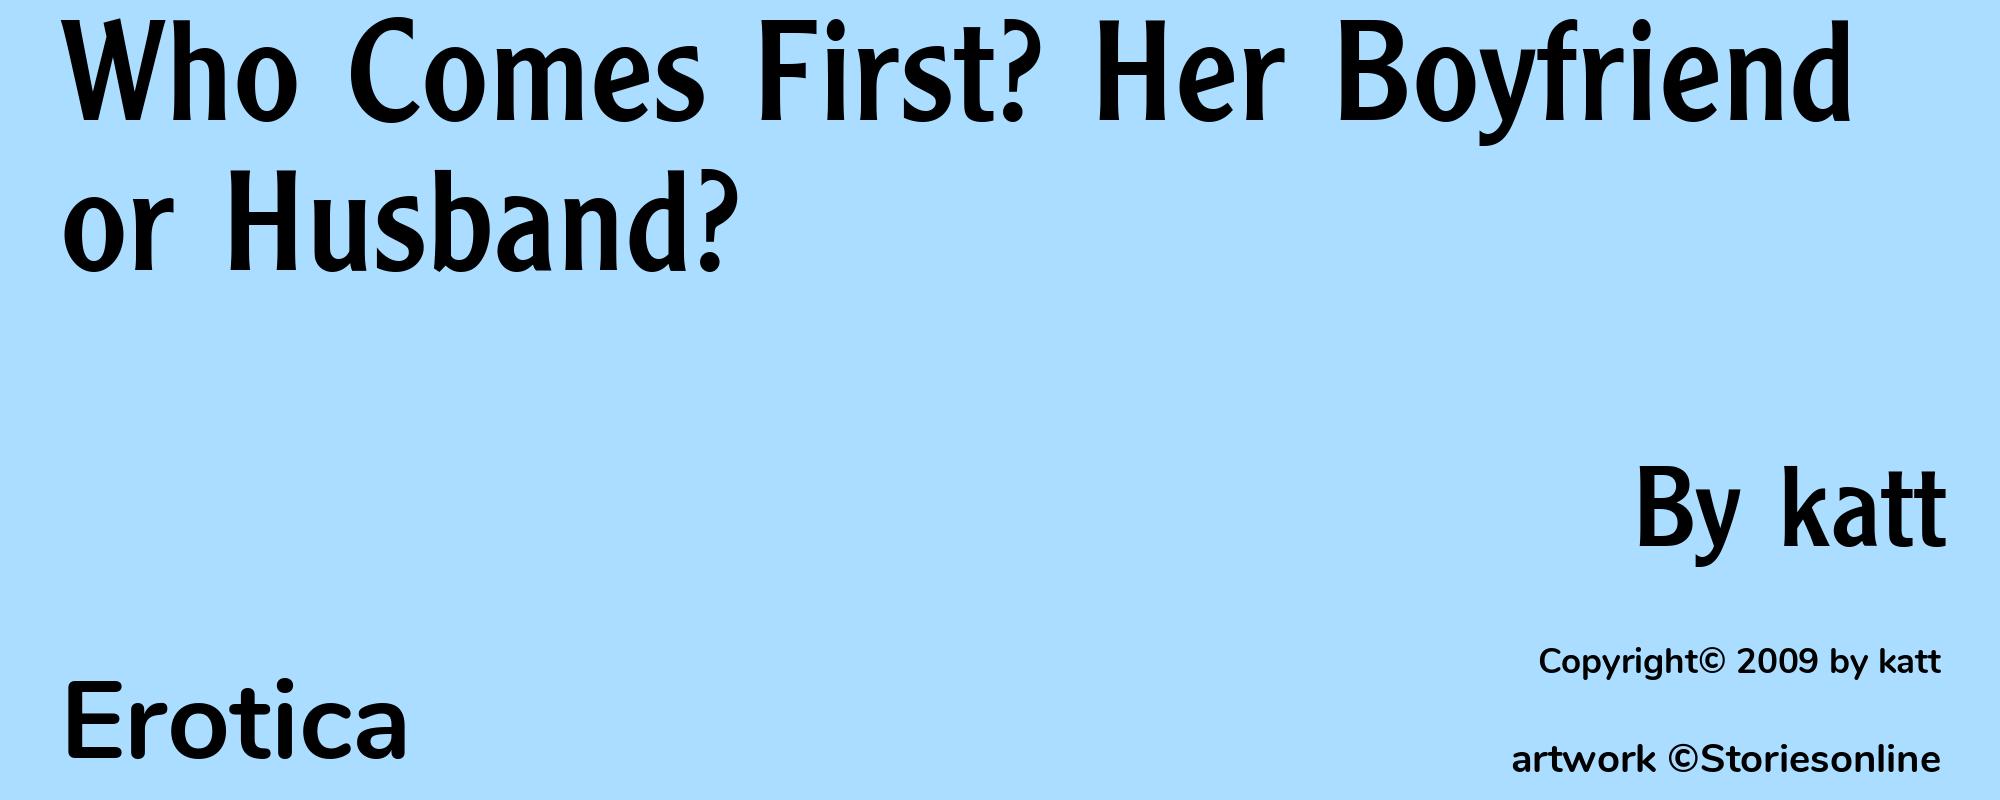 Who Comes First? Her Boyfriend or Husband? - Cover